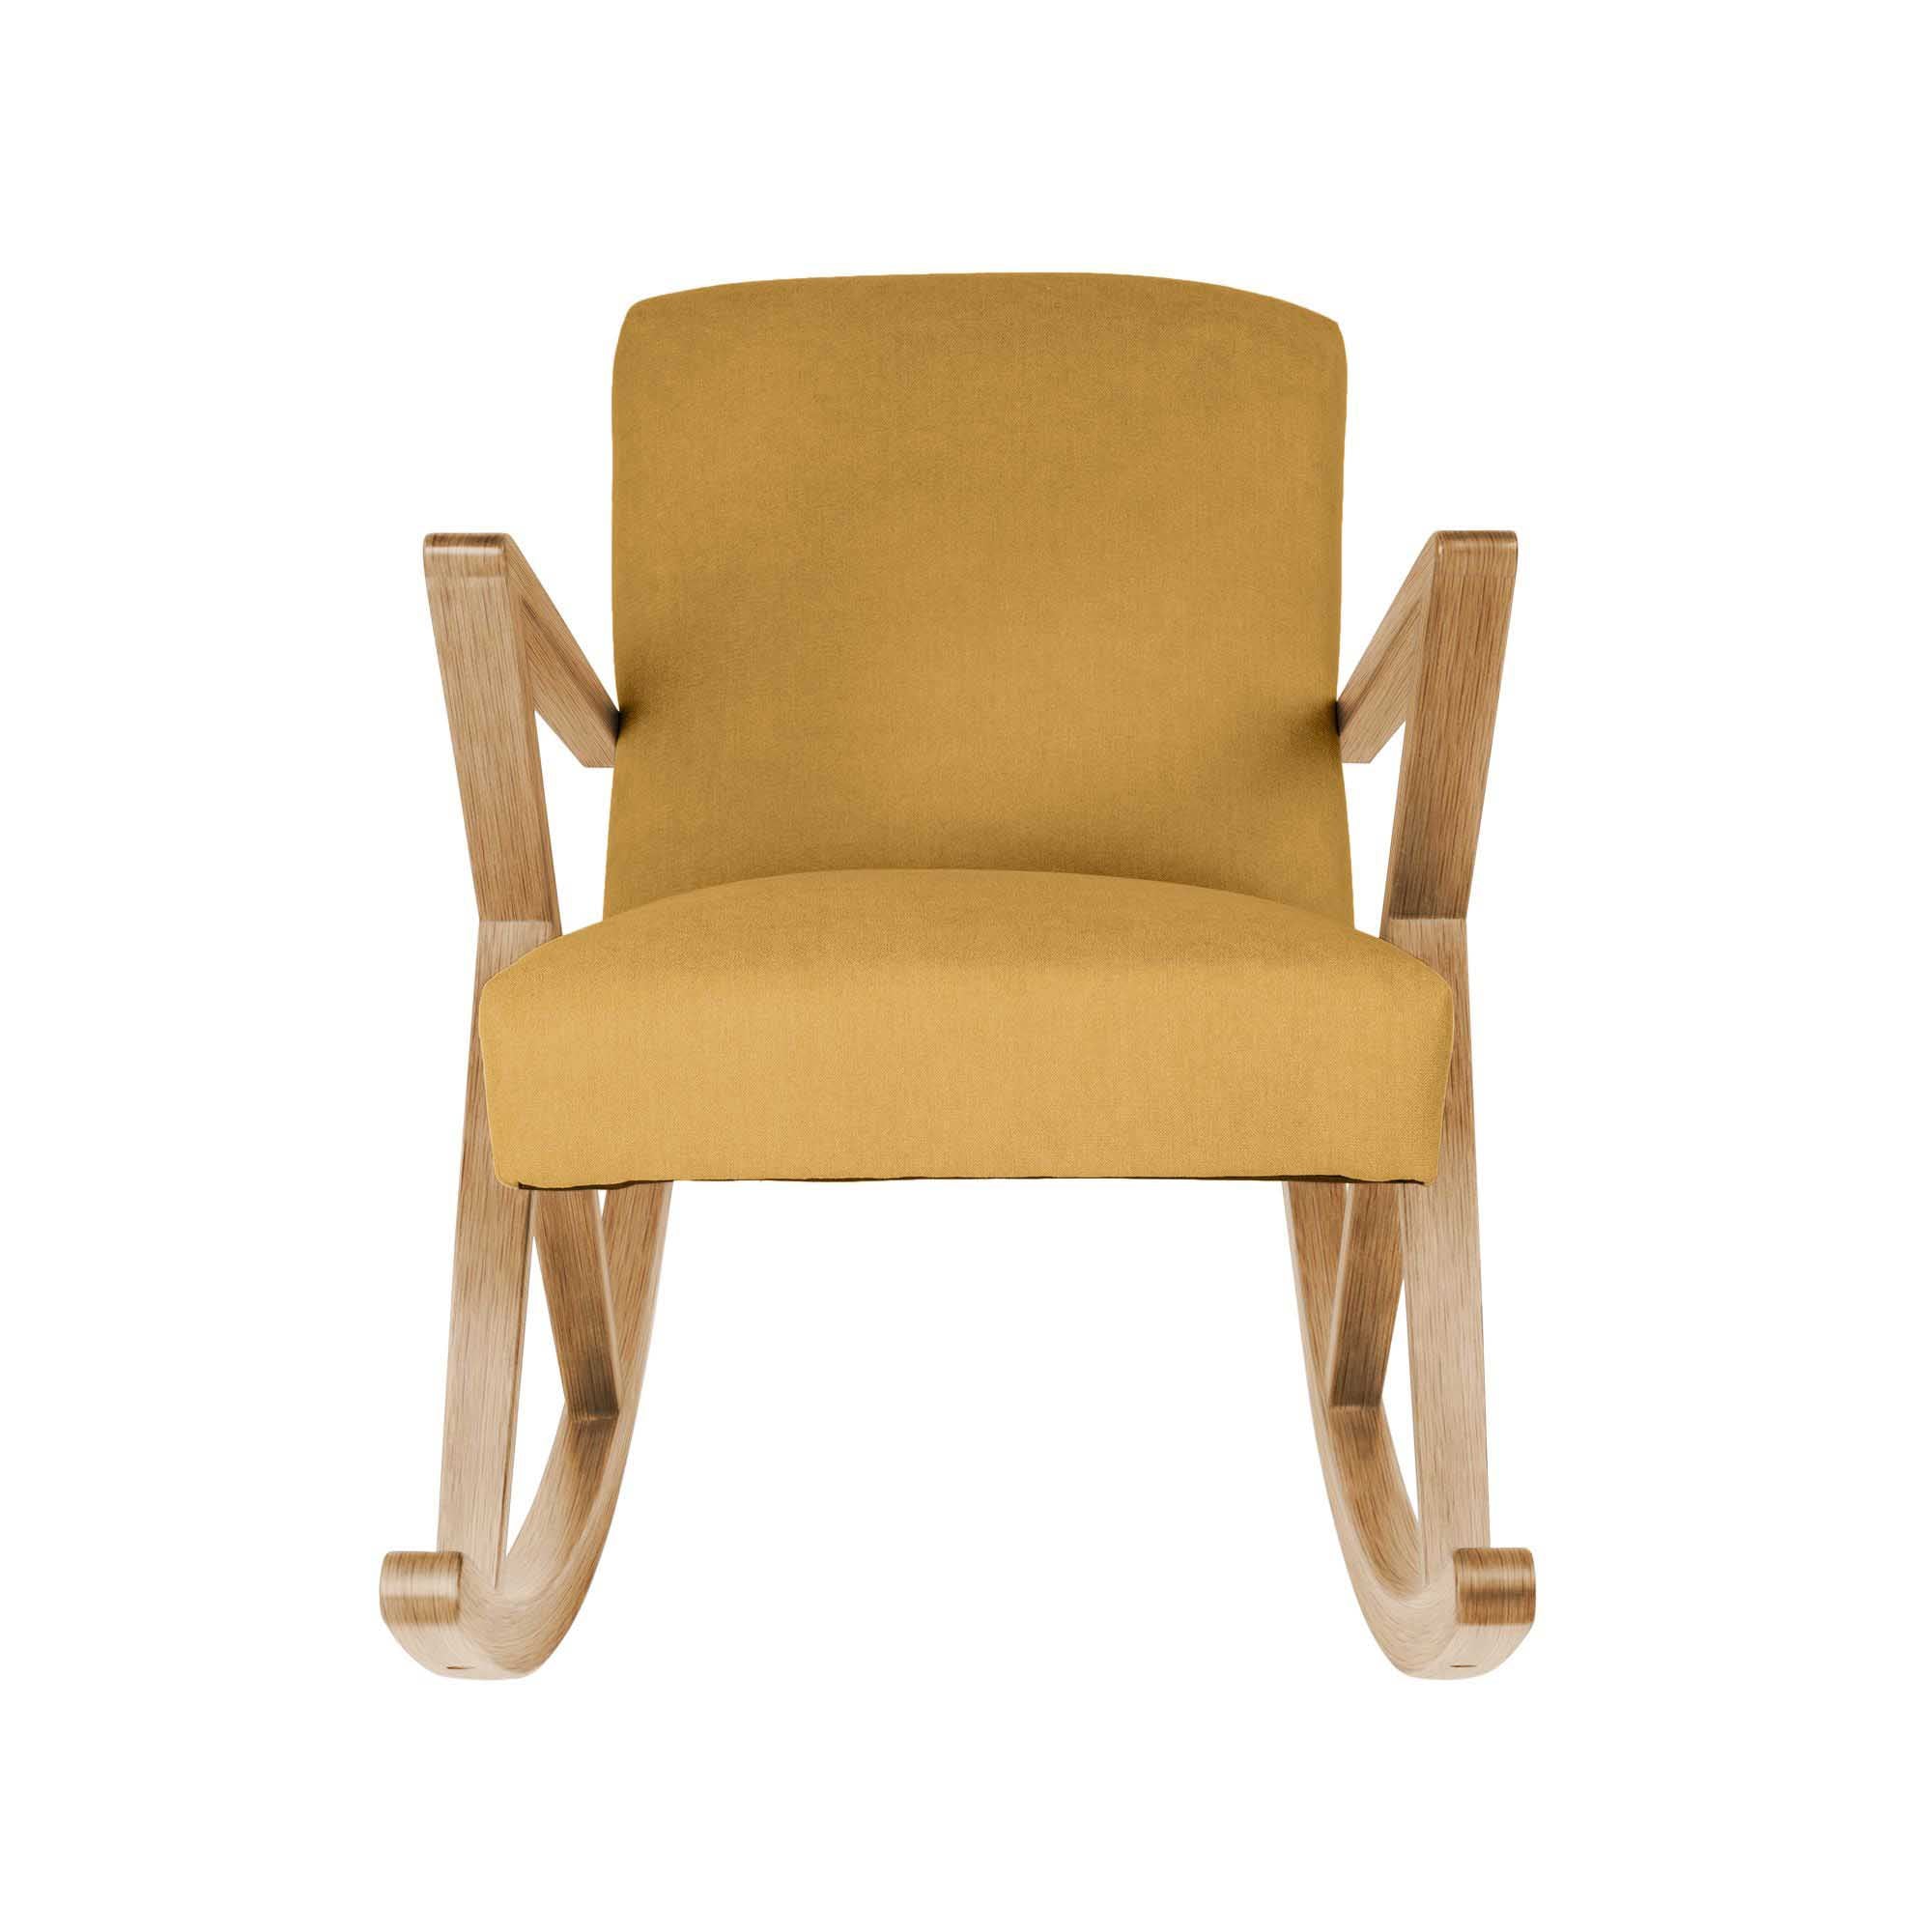 Rocking Chair, Oak Wood Frame, Natural Colour yellow fabric, front view